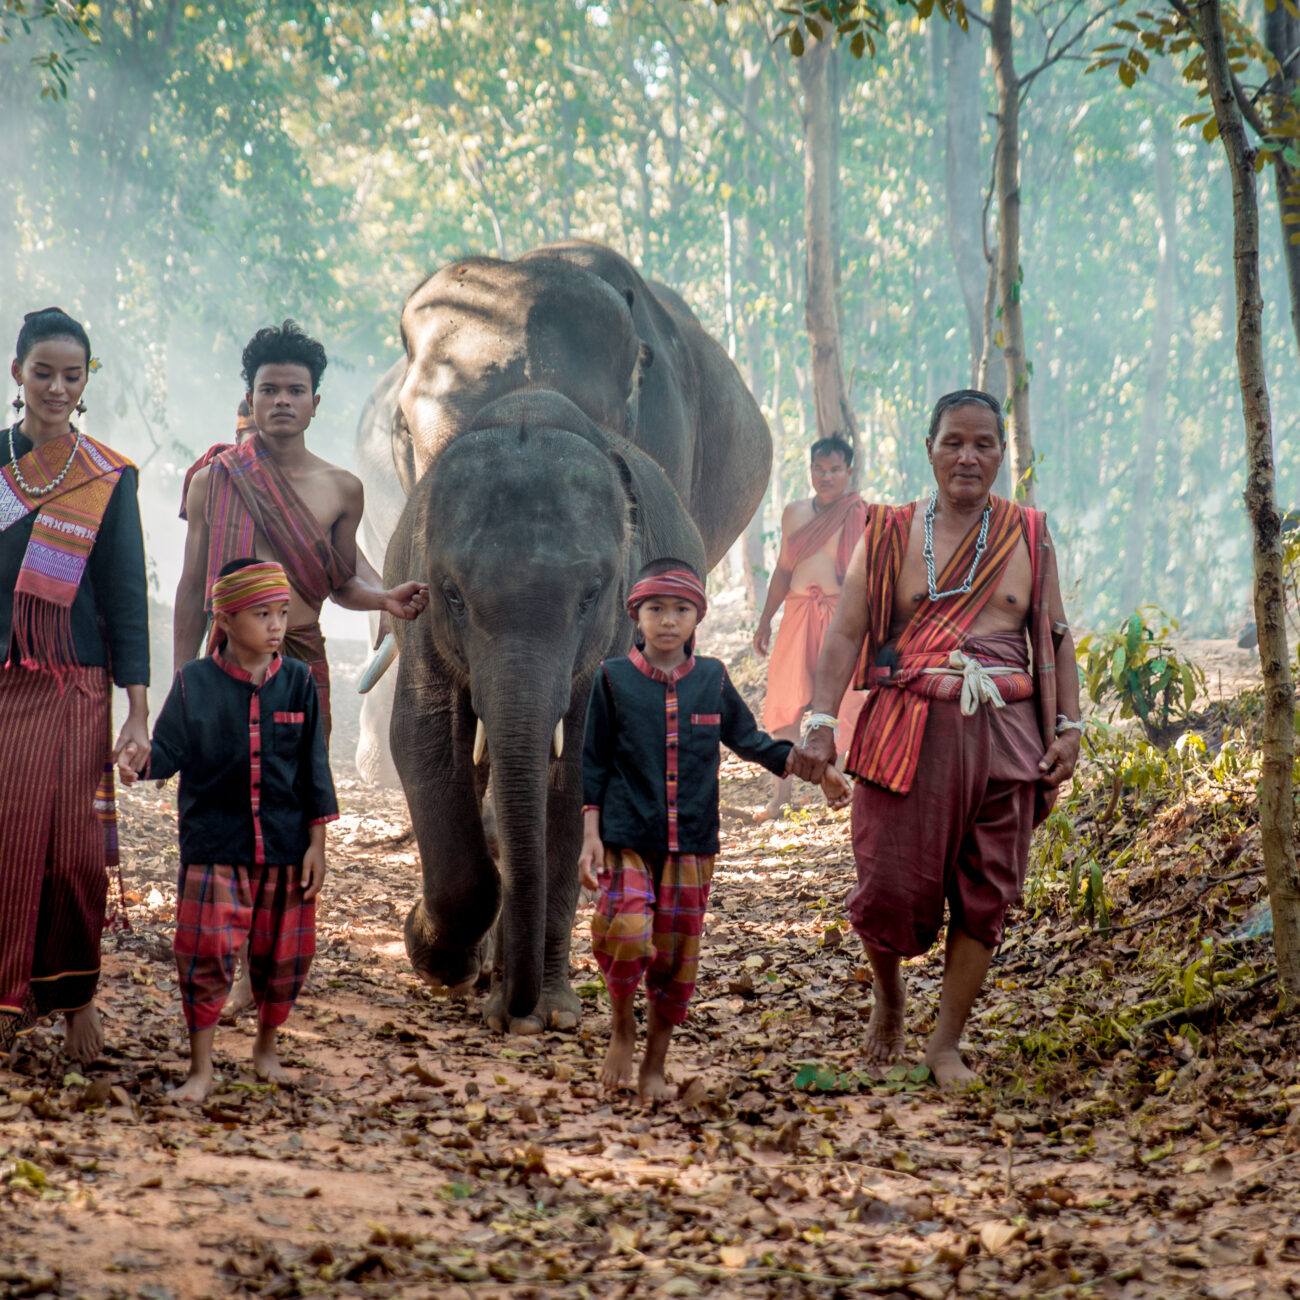 Elephant with group of farmers in asian countryside, Thailand - Thai elephant and people with traditional dress in Surin region